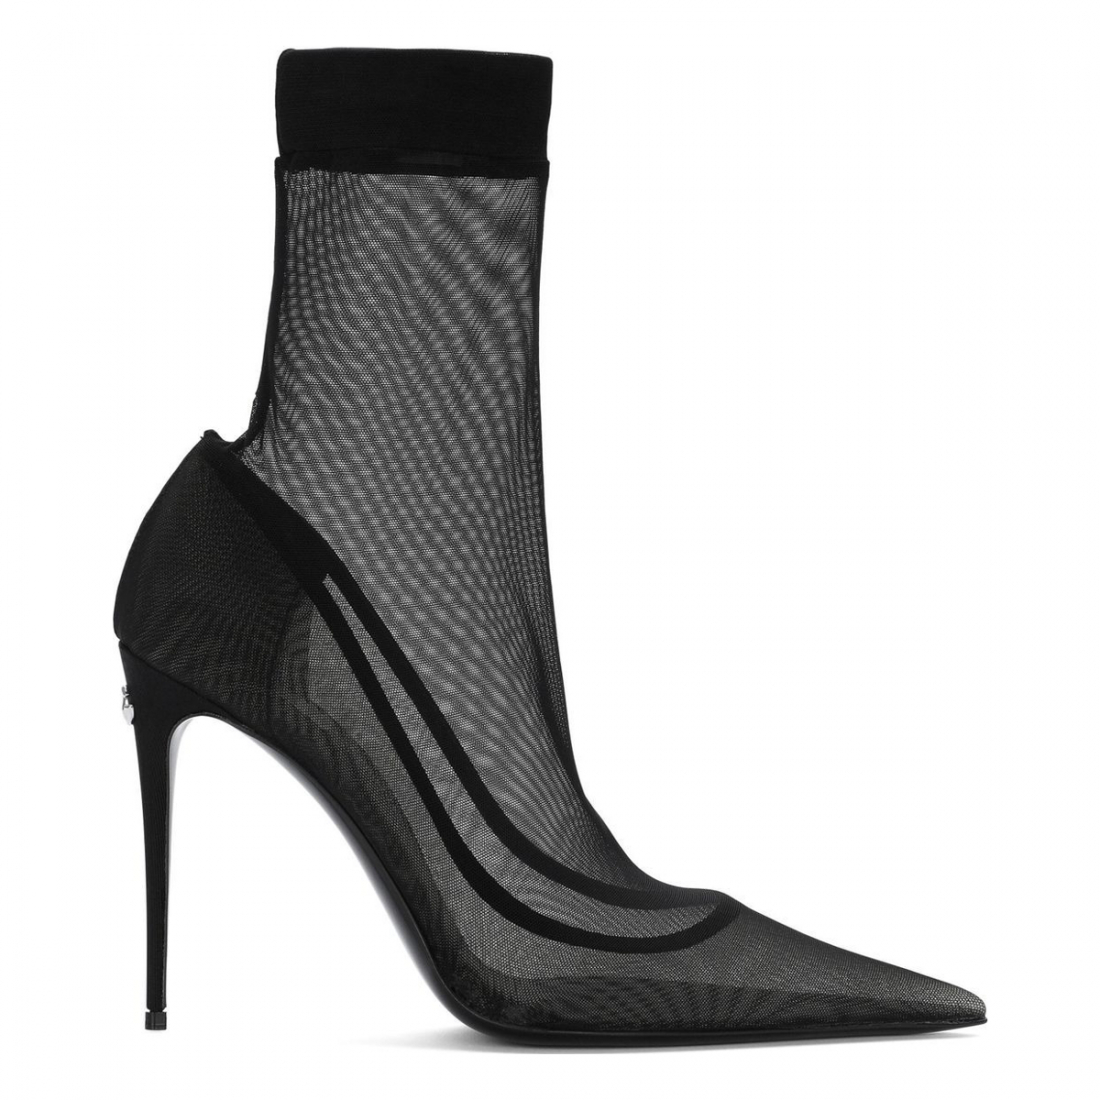 Women's 'Logo Ankle' High Heeled Boots